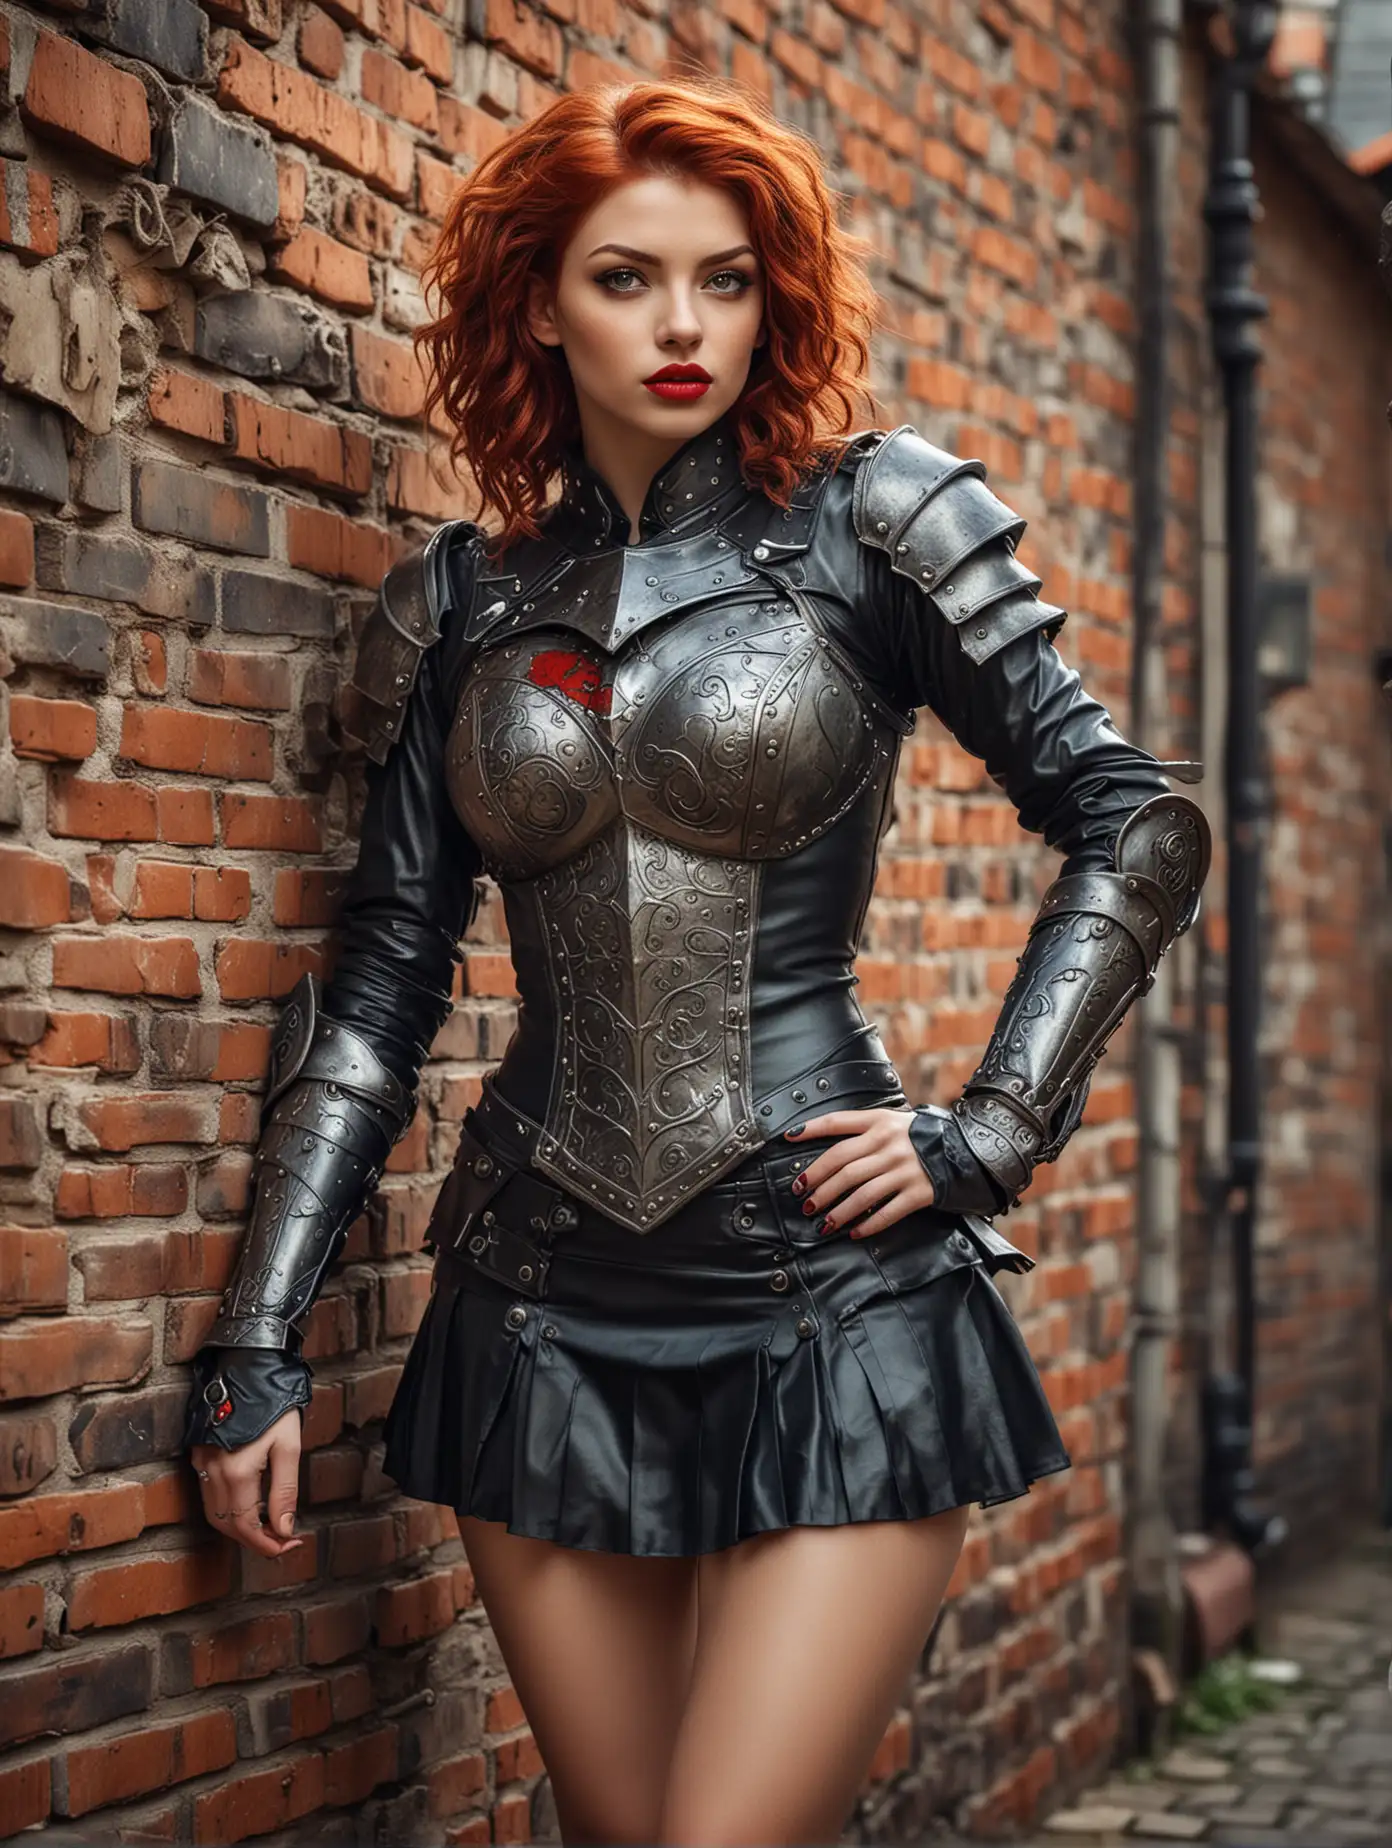 Fantasy-Paladin-Girl-in-Armor-and-Curly-Red-Hair